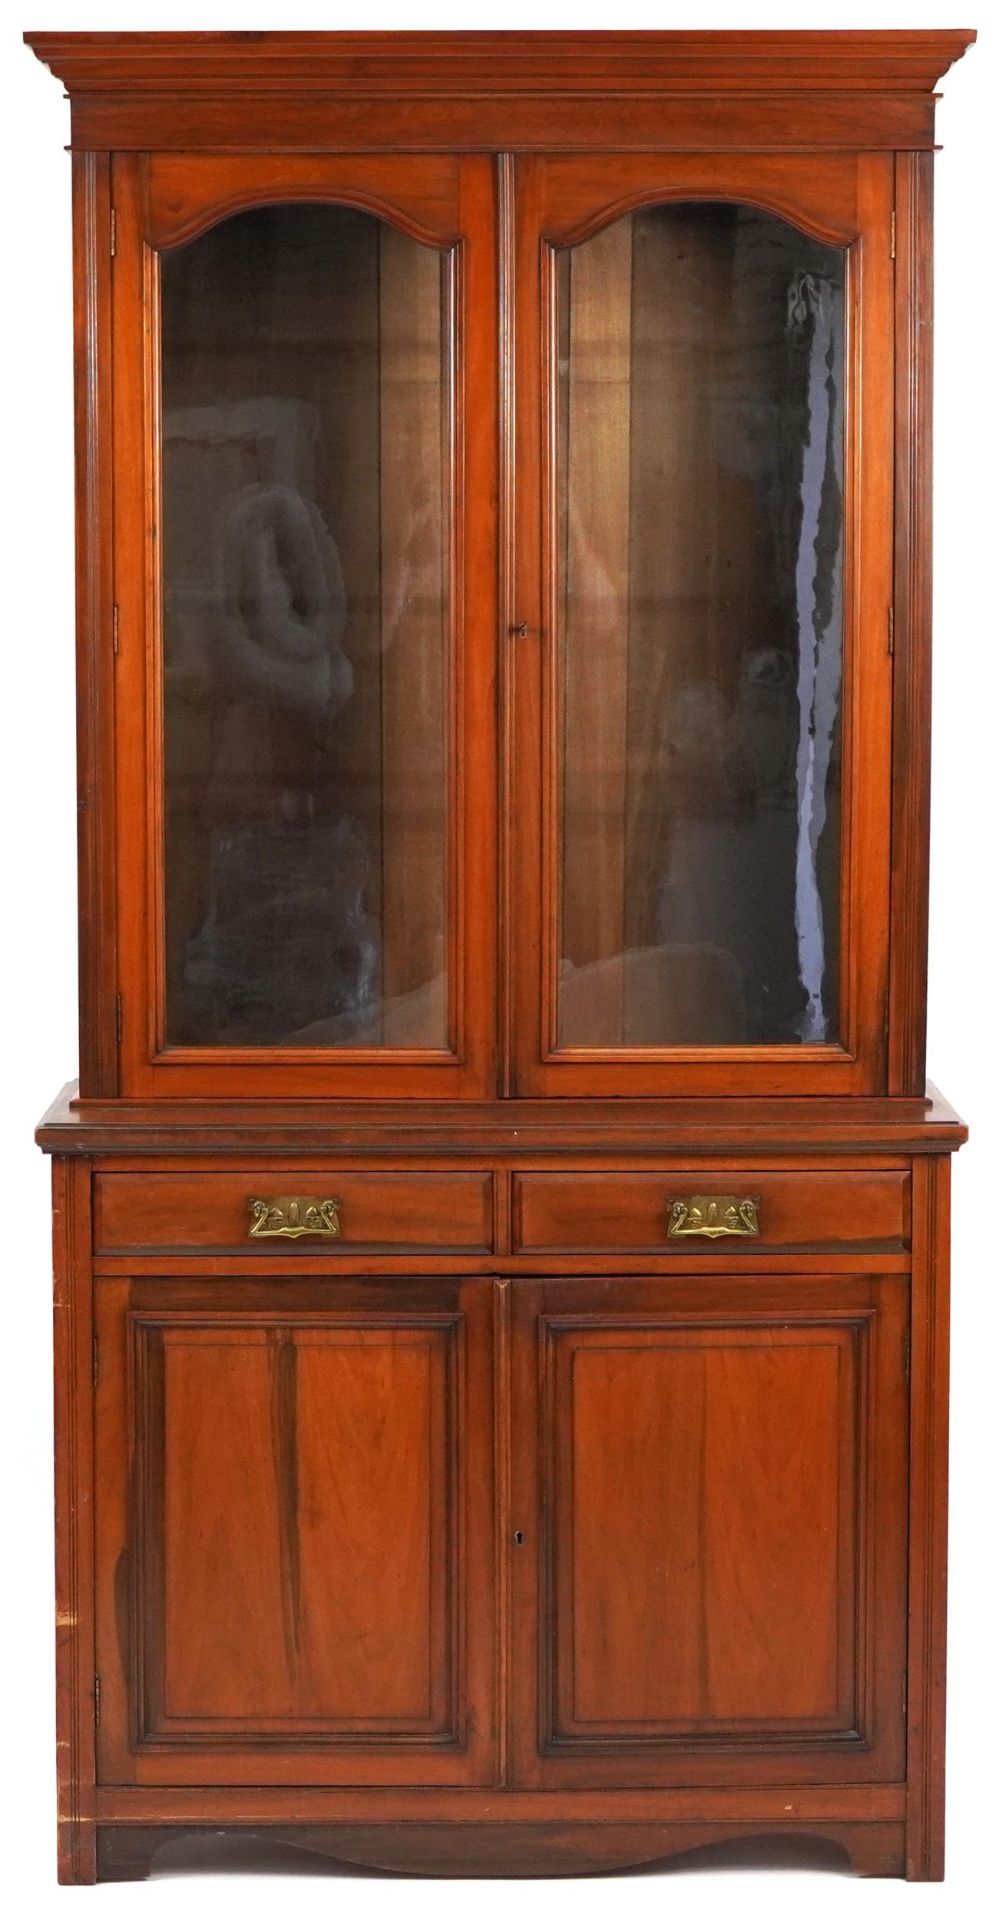 Edwardian mahogany bookcase with pair of glazed doors above pair of drawers and pair of cupboard